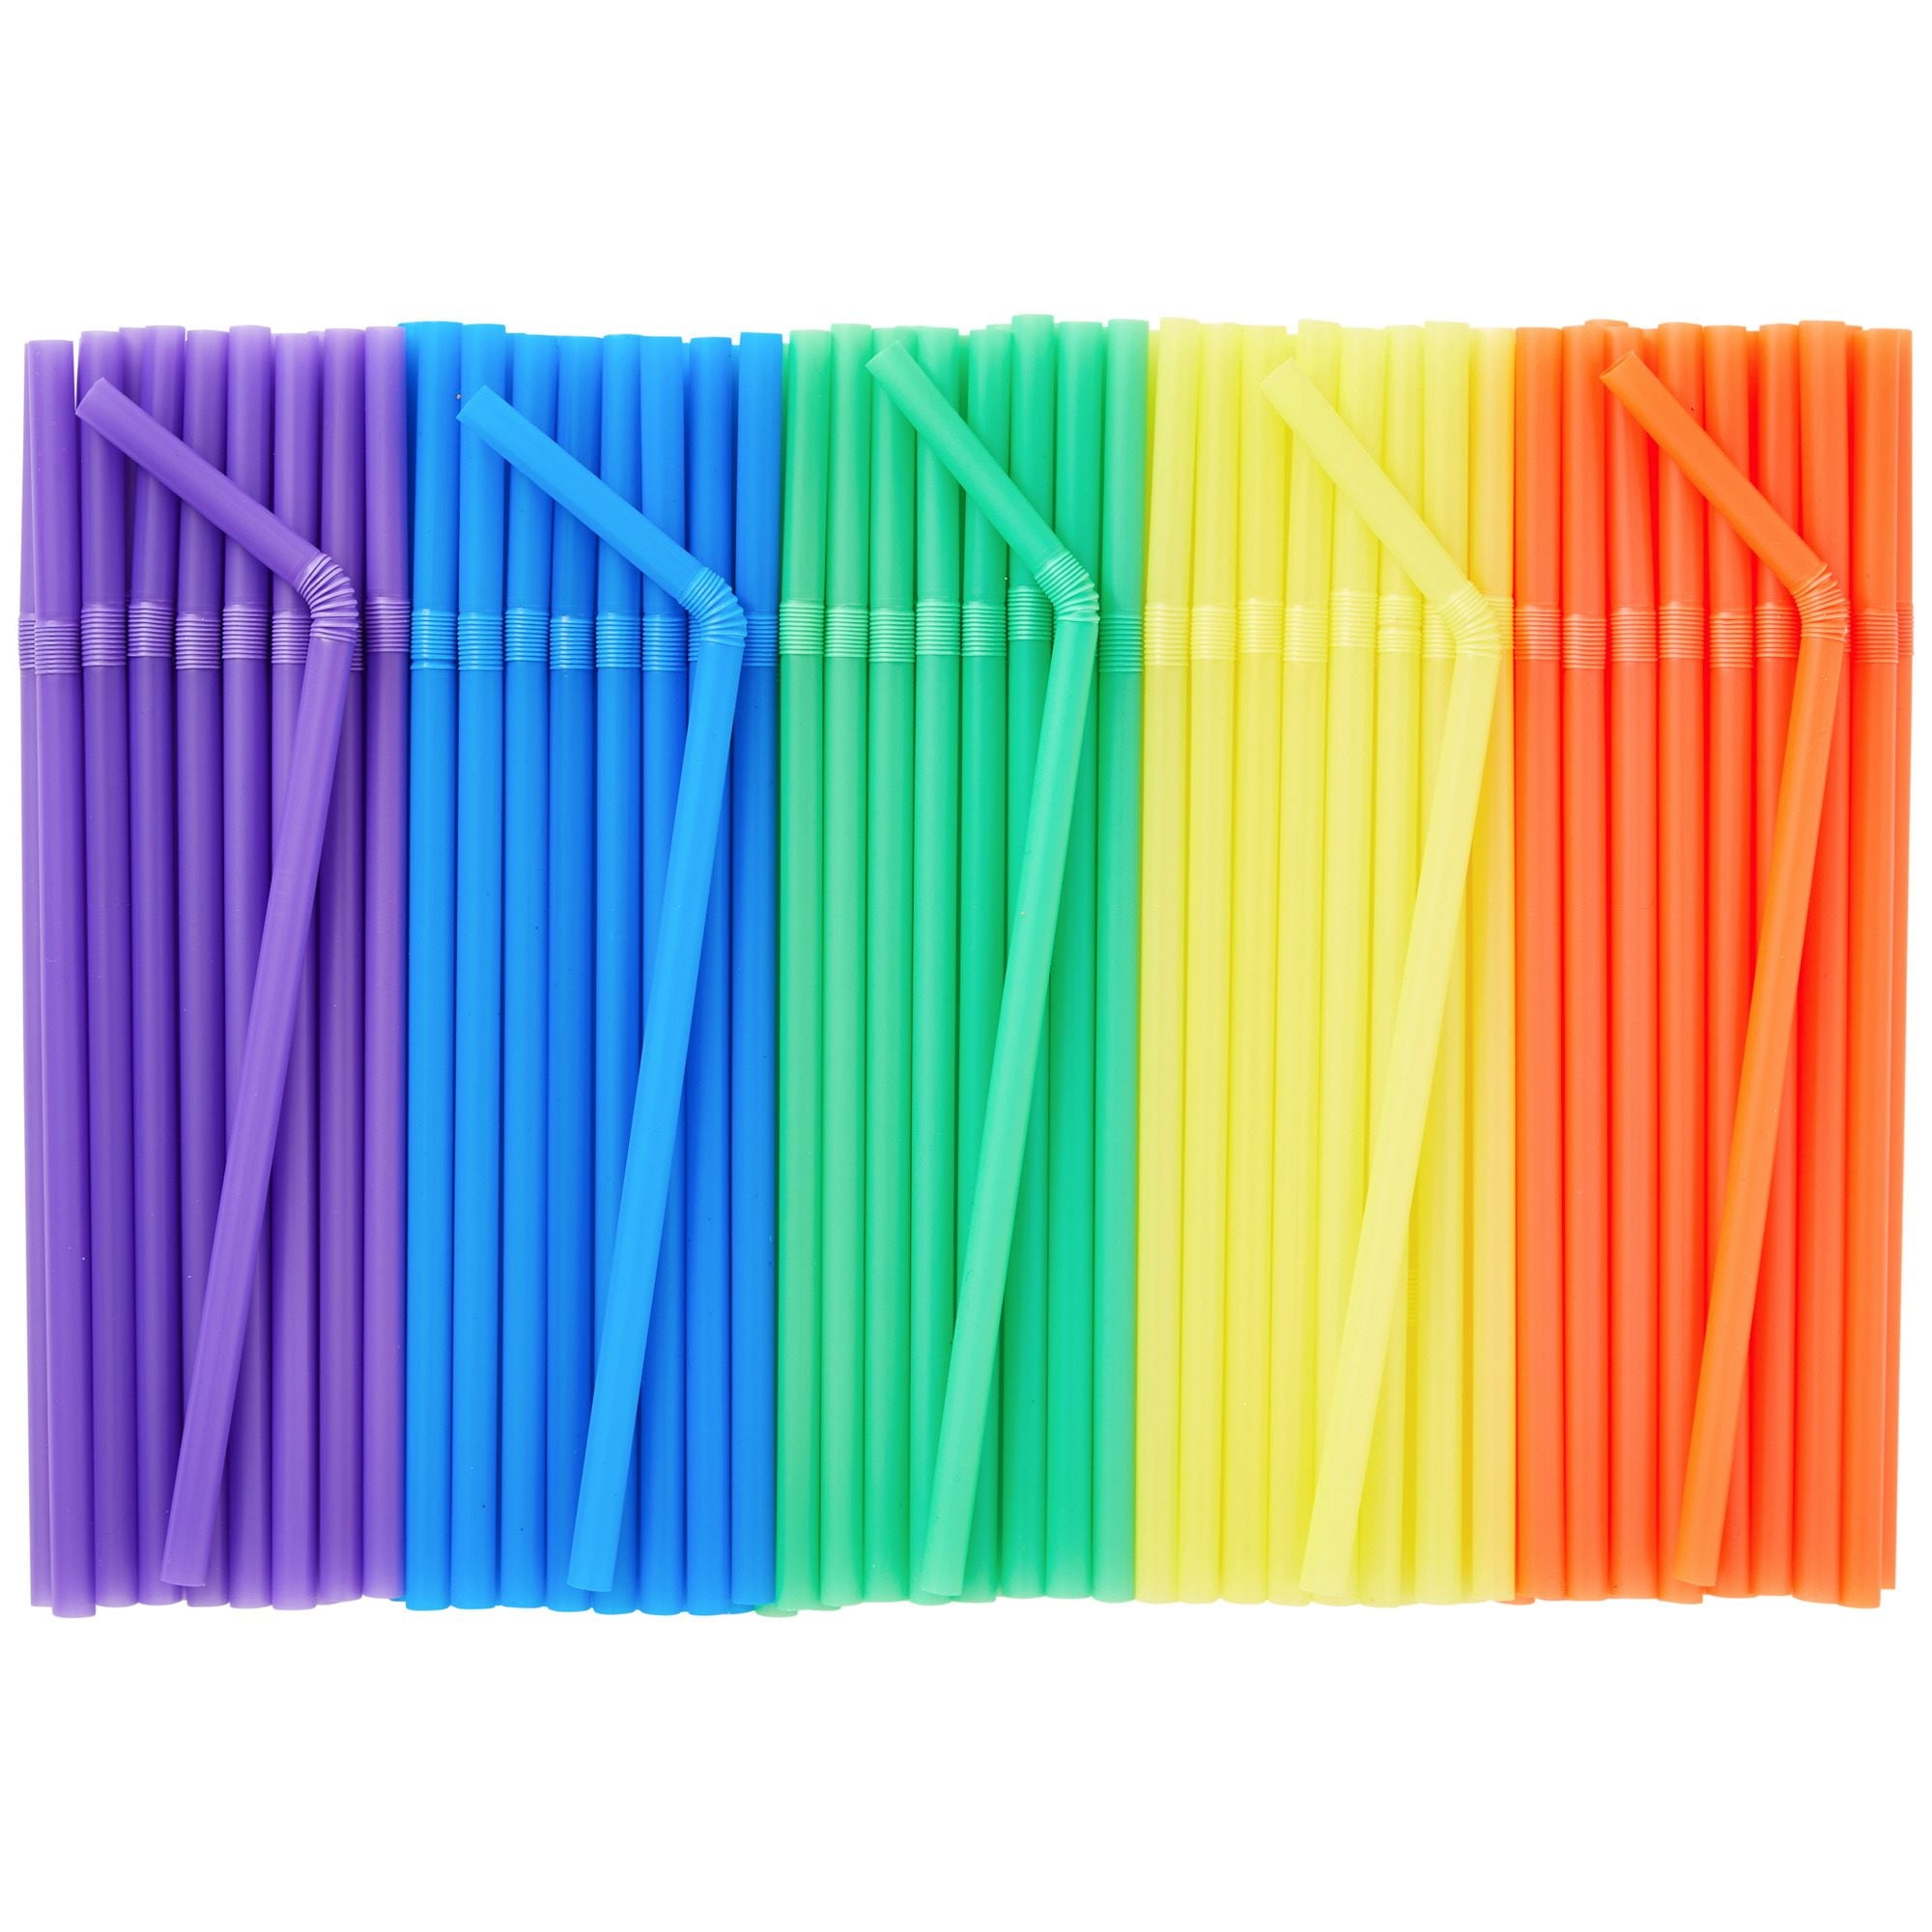 380 Pack Individually Wrapped Disposable Plastic Flexible Drinking Straws - BPA Free - White